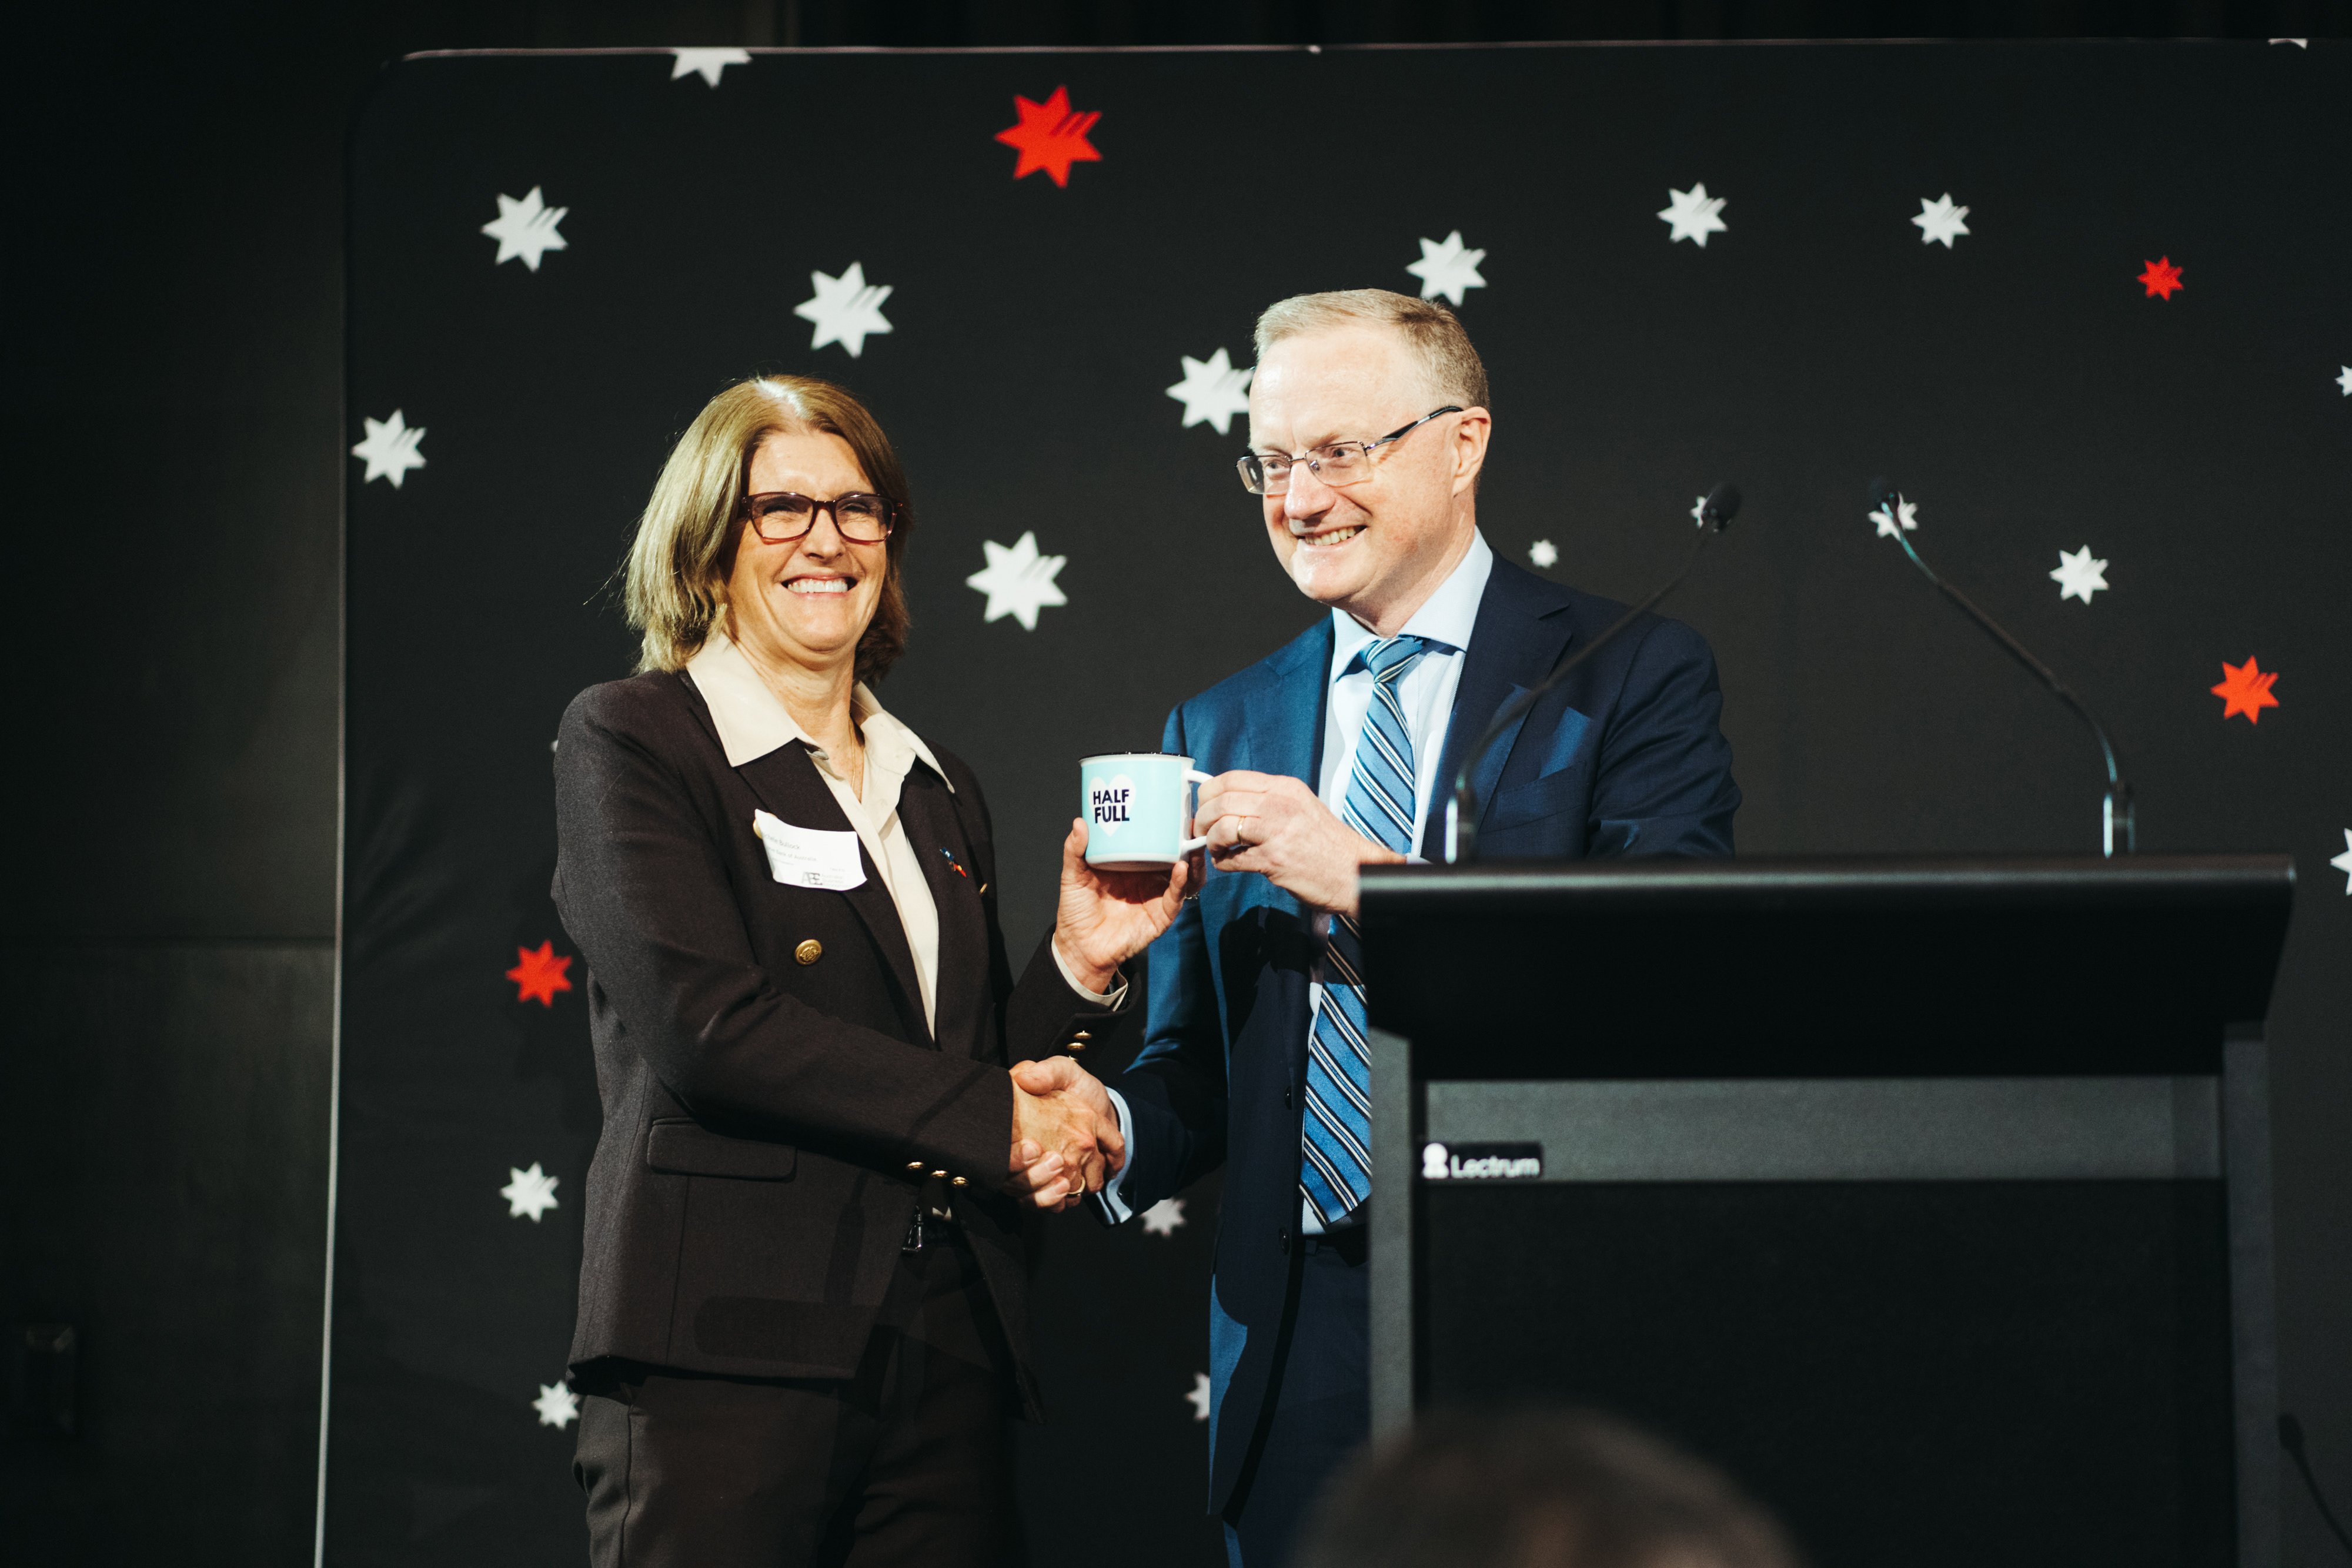 Newly appointed Governor Michele Bullock receiving a mug from Philip Lowe